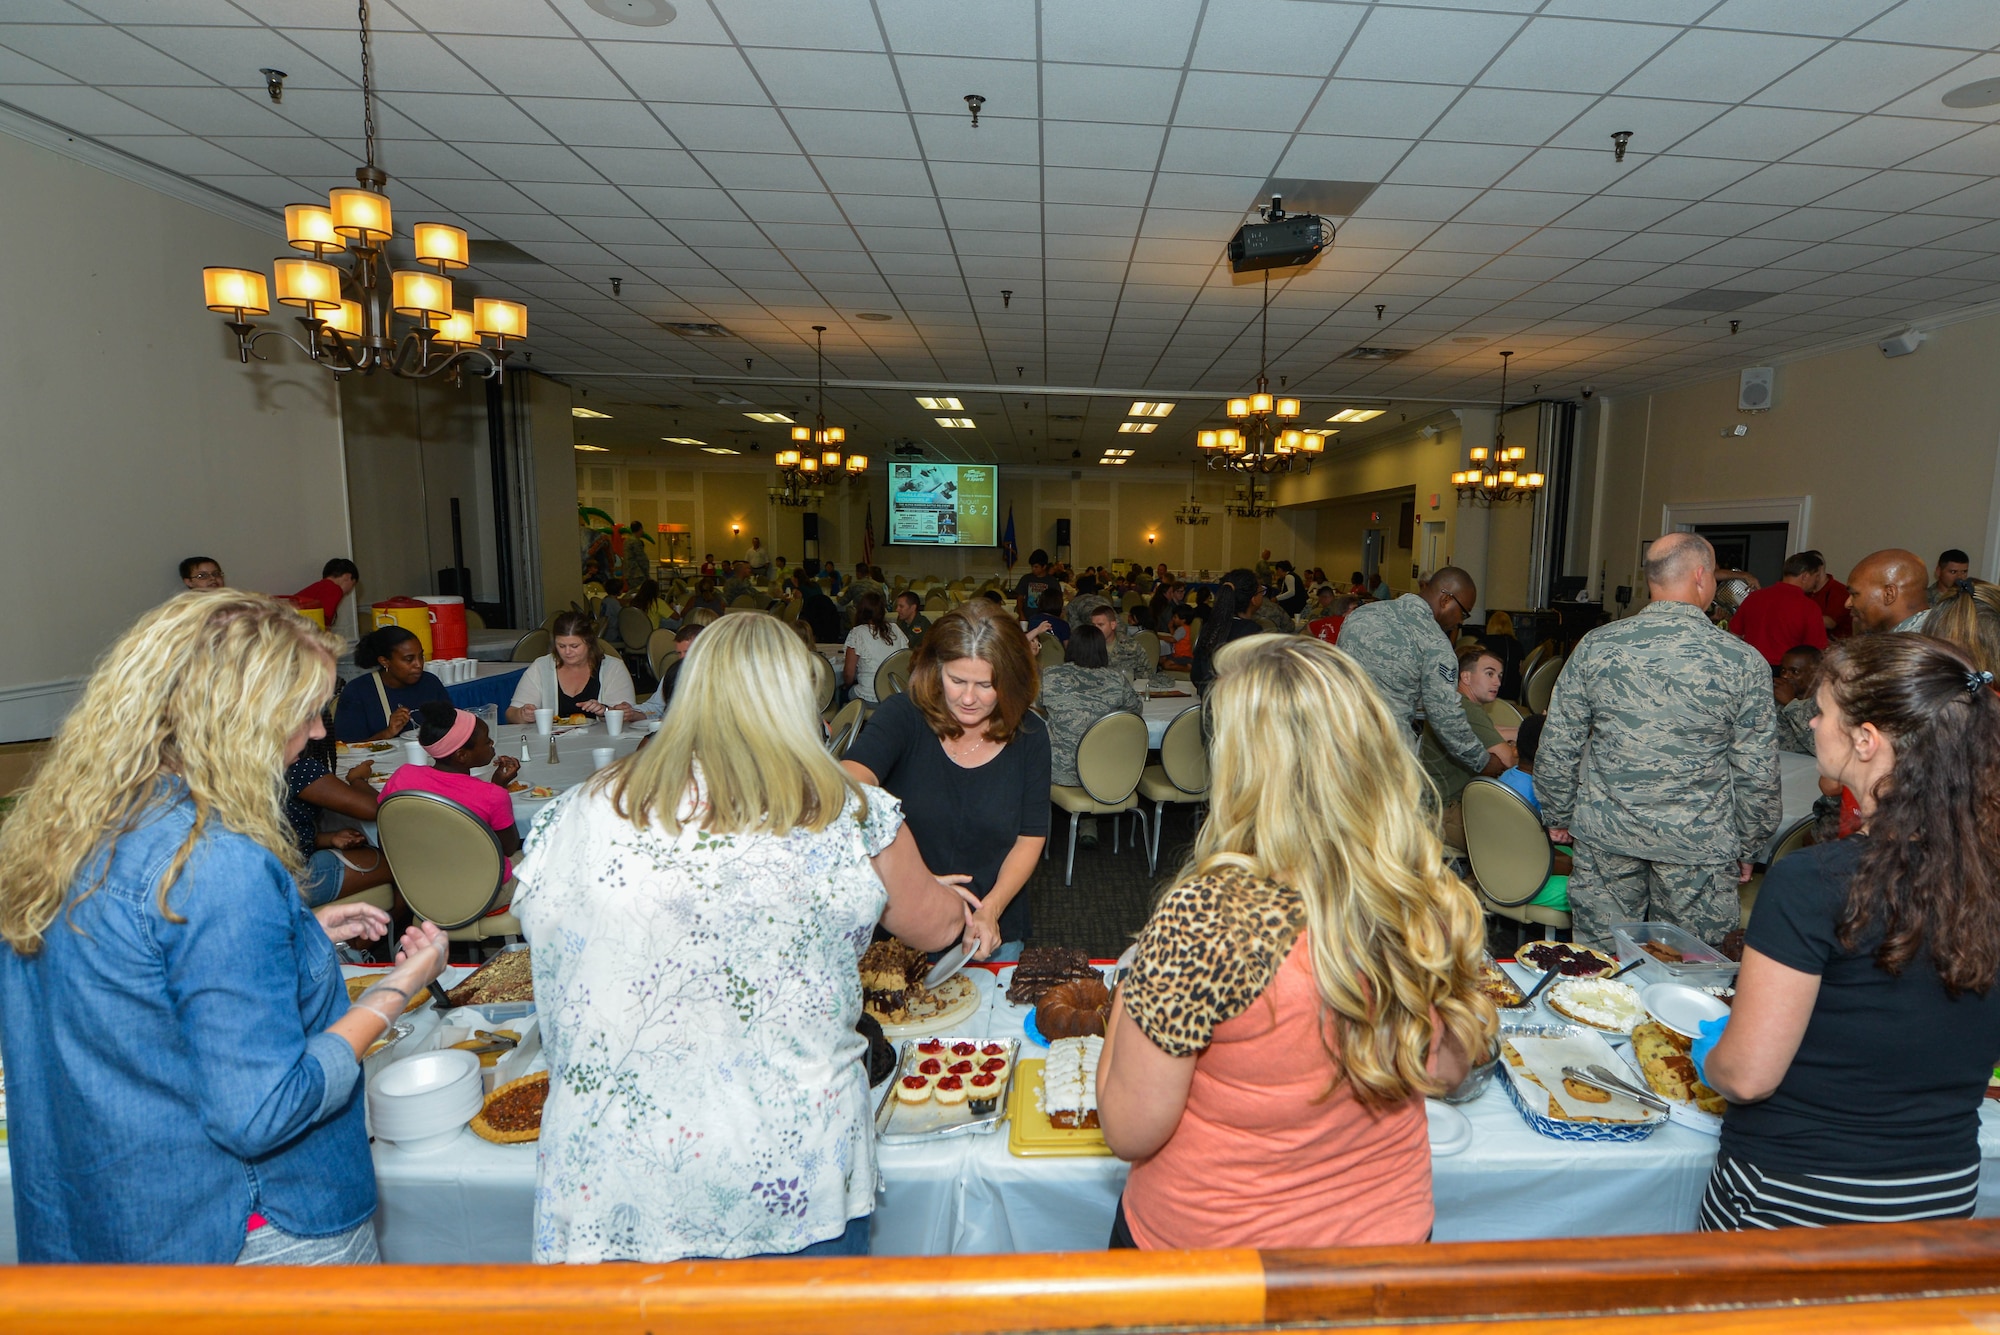 Volunteers serve food during a Deployed Family Dinner at the Carolina Skies Club and Conference Center at Shaw Air Force Base, S.C., July 24, 2017. During the dinner, 25 volunteers from a local church and seven military volunteers provided food and service for more than 60 family members. (U.S. Air Force photo by Airman 1st Class Destinee Sweeney)